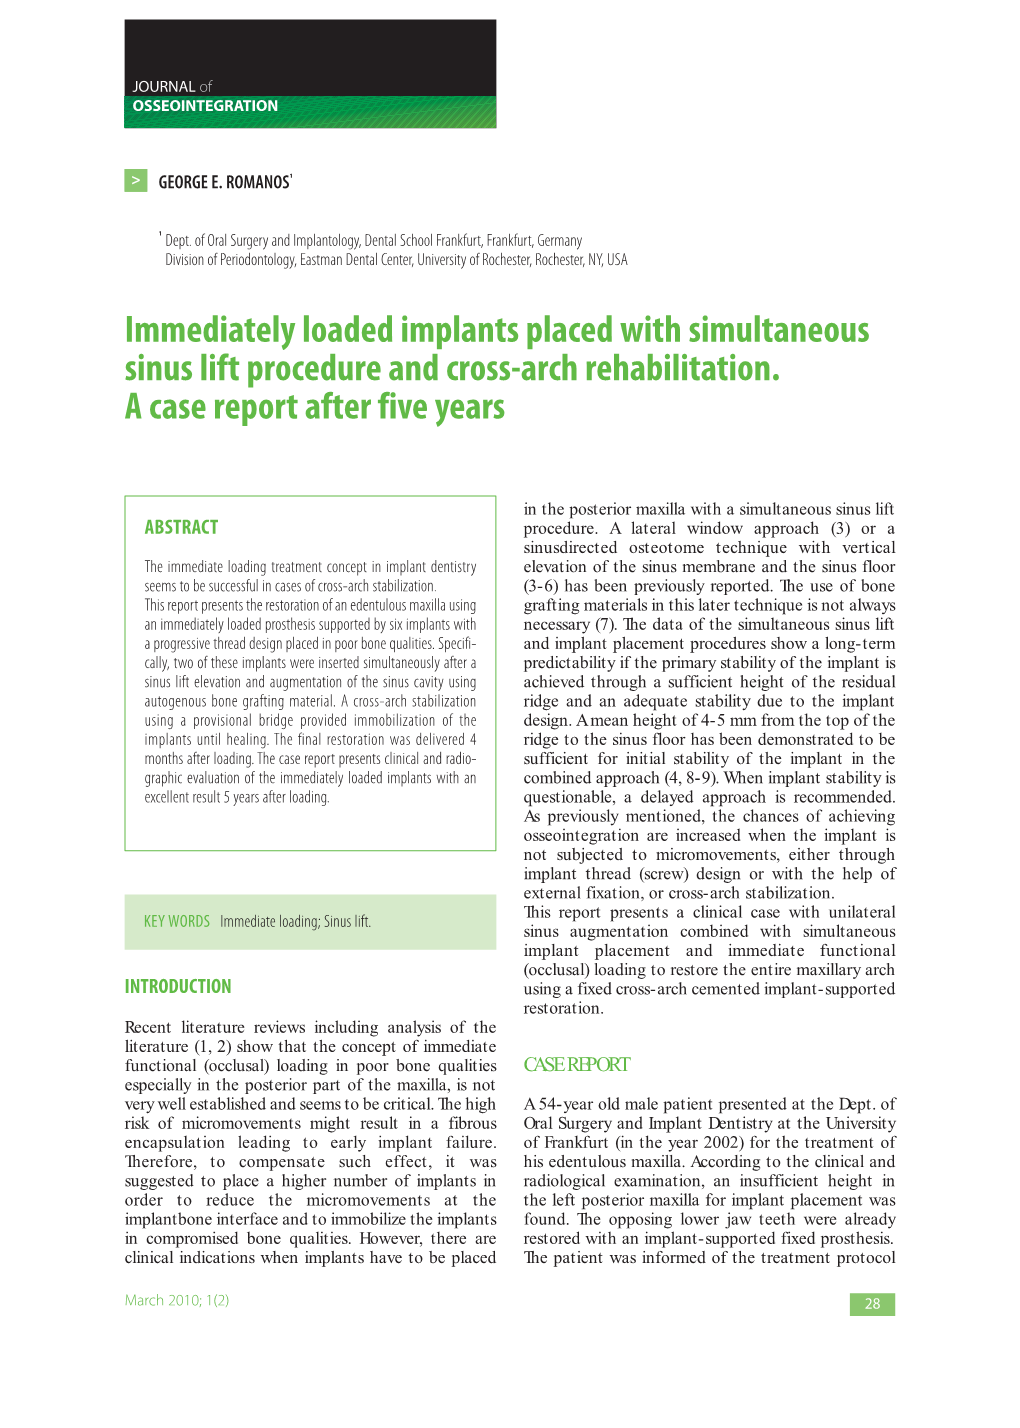 Immediately Loaded Implants Placed with Simultaneous Sinus Lift Procedure and Cross-Arch Rehabilitation. a Case Report After Five Years